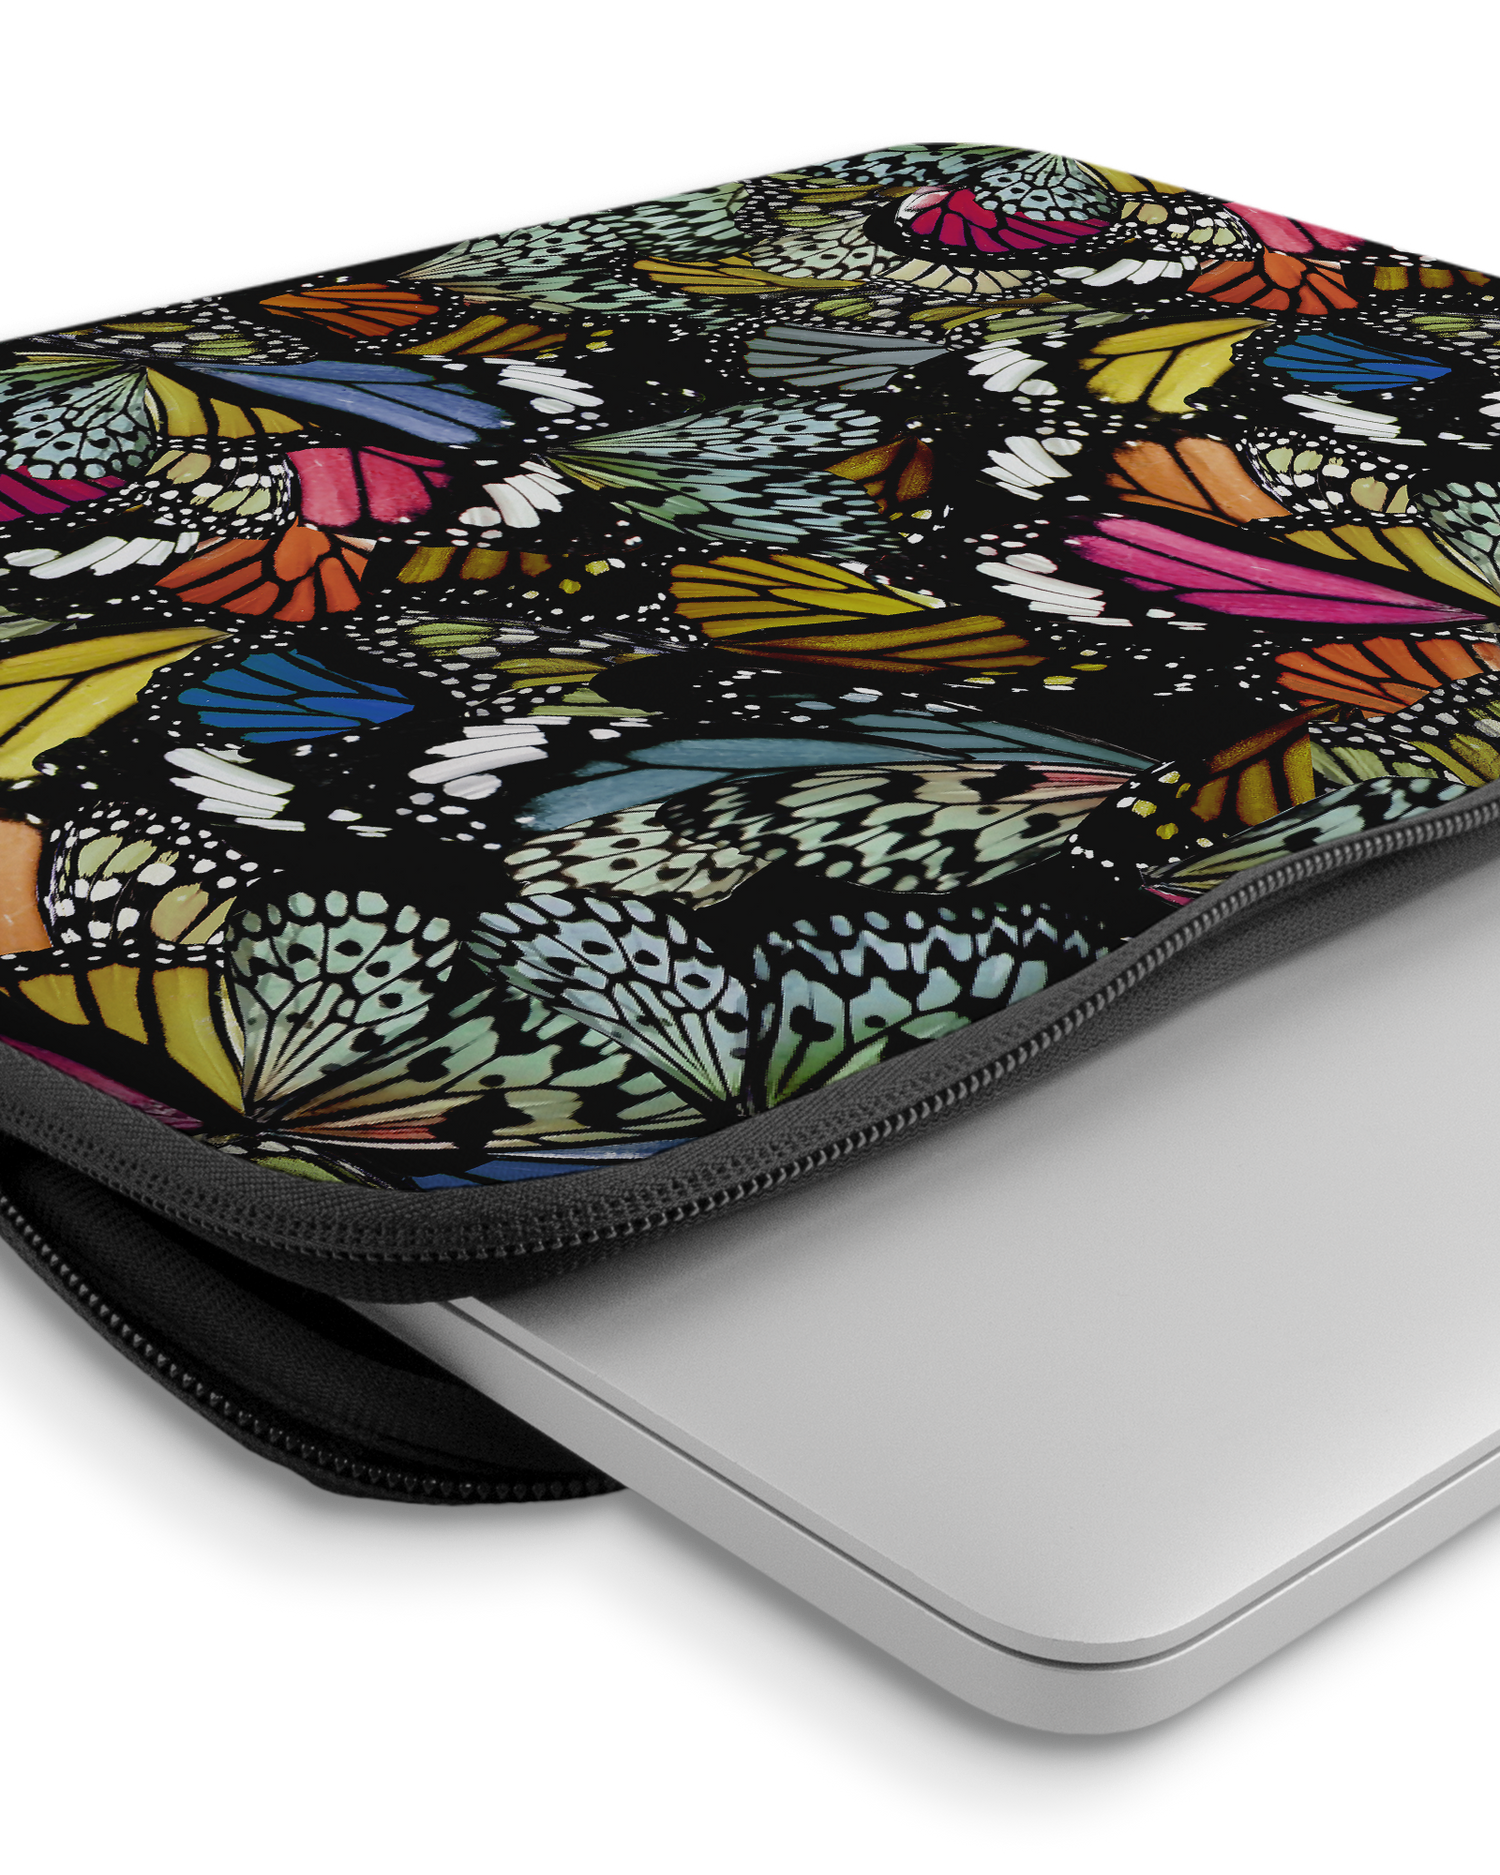 Psychedelic Butterflies Laptop Case 14-15 inch with device inside